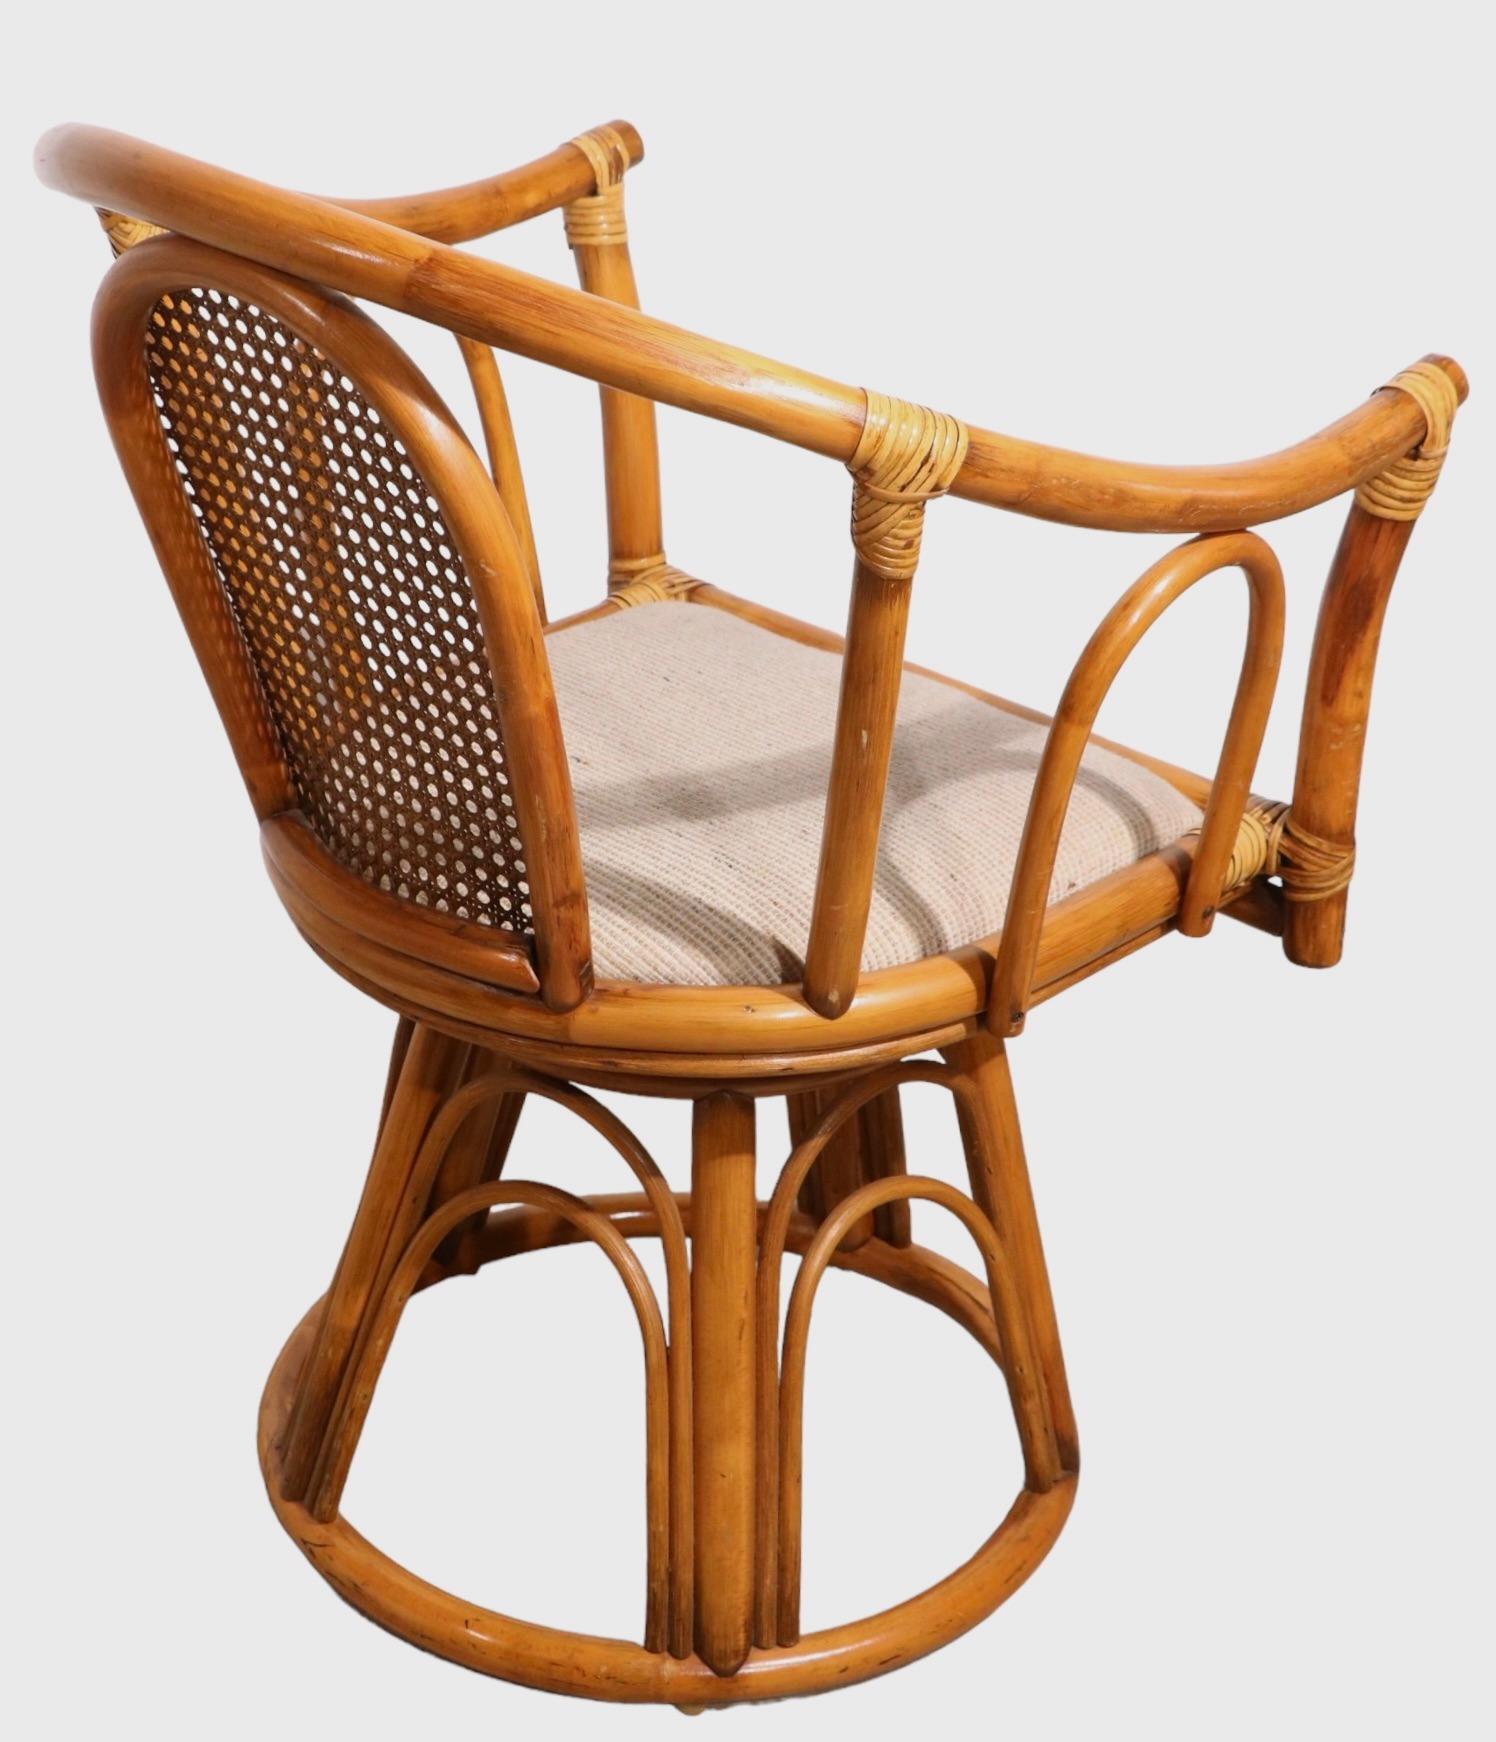 Swivel Bamboo Chair by Henry Olko In Good Condition For Sale In New York, NY